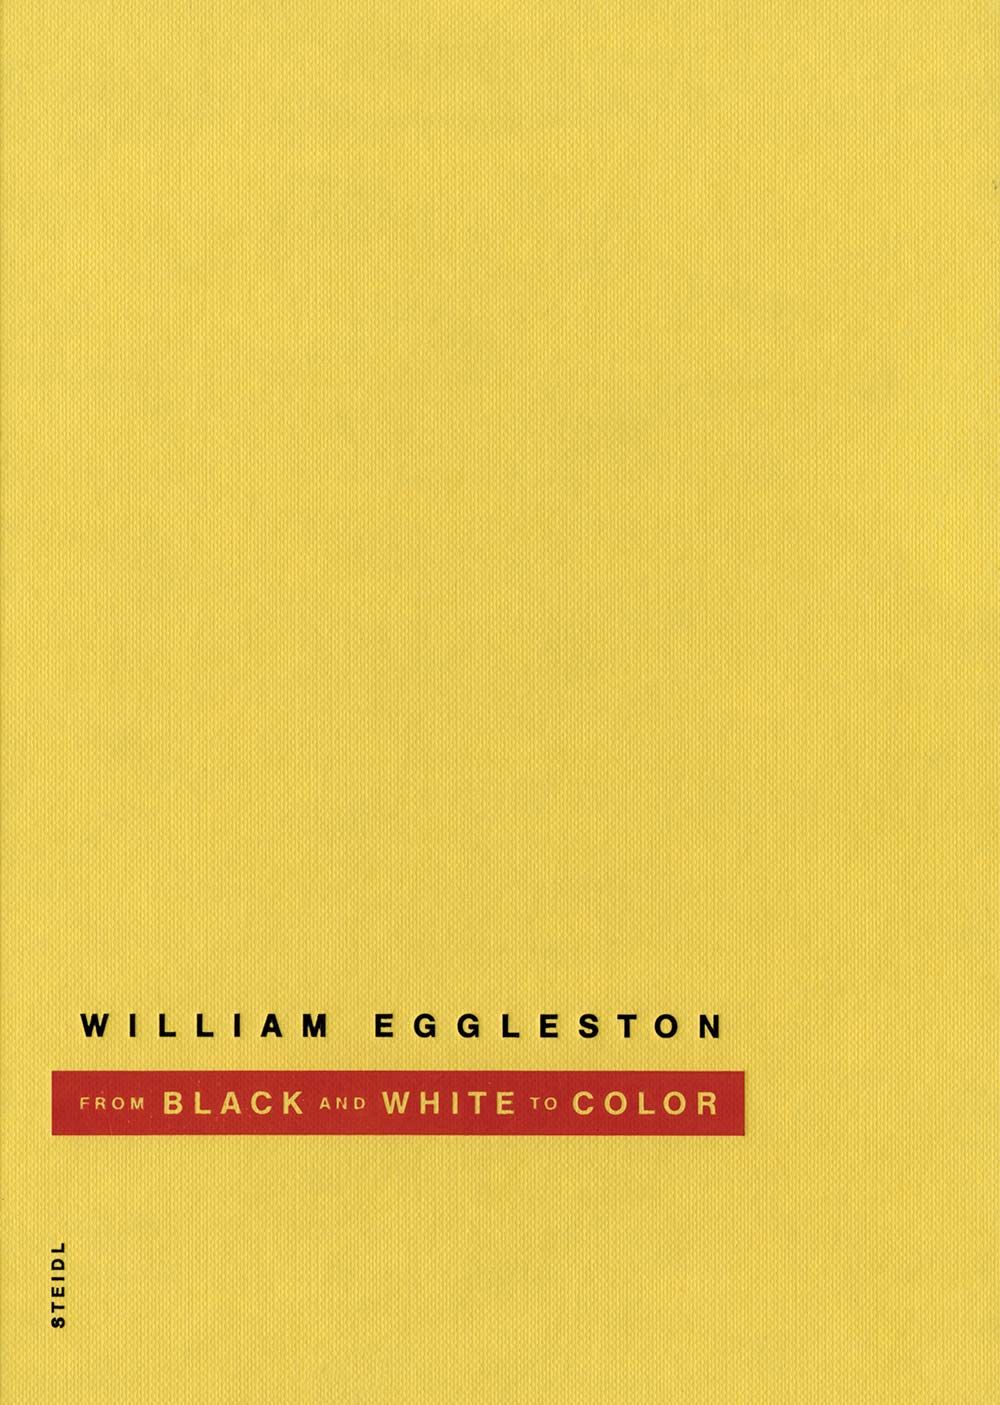 William Eggleston: From Black and White to Color | David Zwirner 